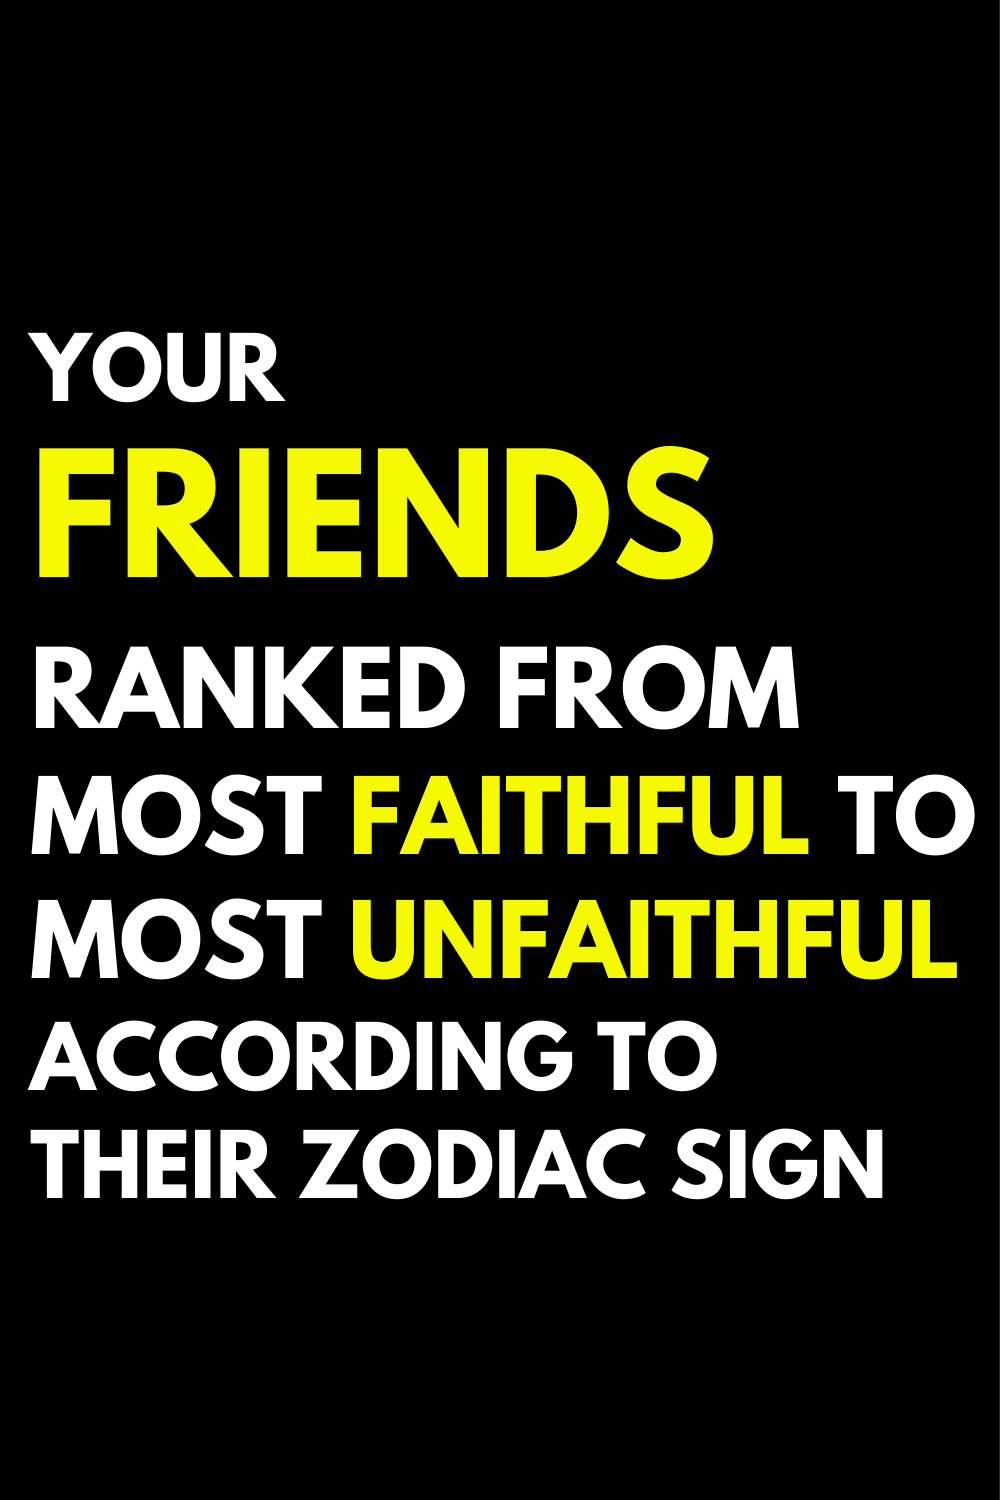 Your Friends Ranked From Most Faithful To Most Unfaithful According To Their Zodiac Sign